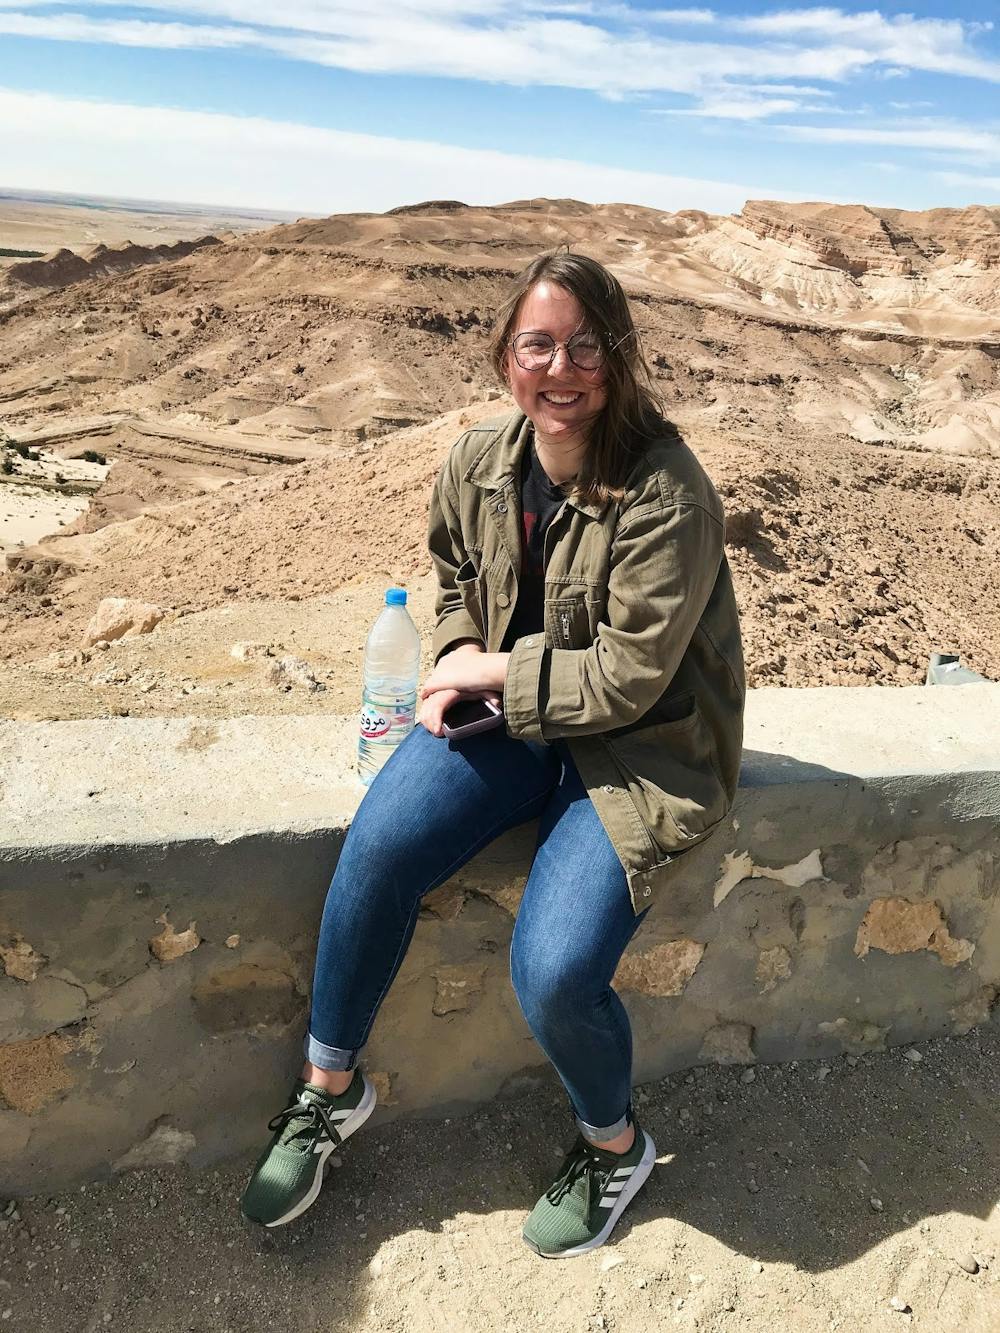 Elyse Legeay is completing an online independent study in place of an internship now that her study abroad experience in Tunisia was cut short due to the novel coronavirus.